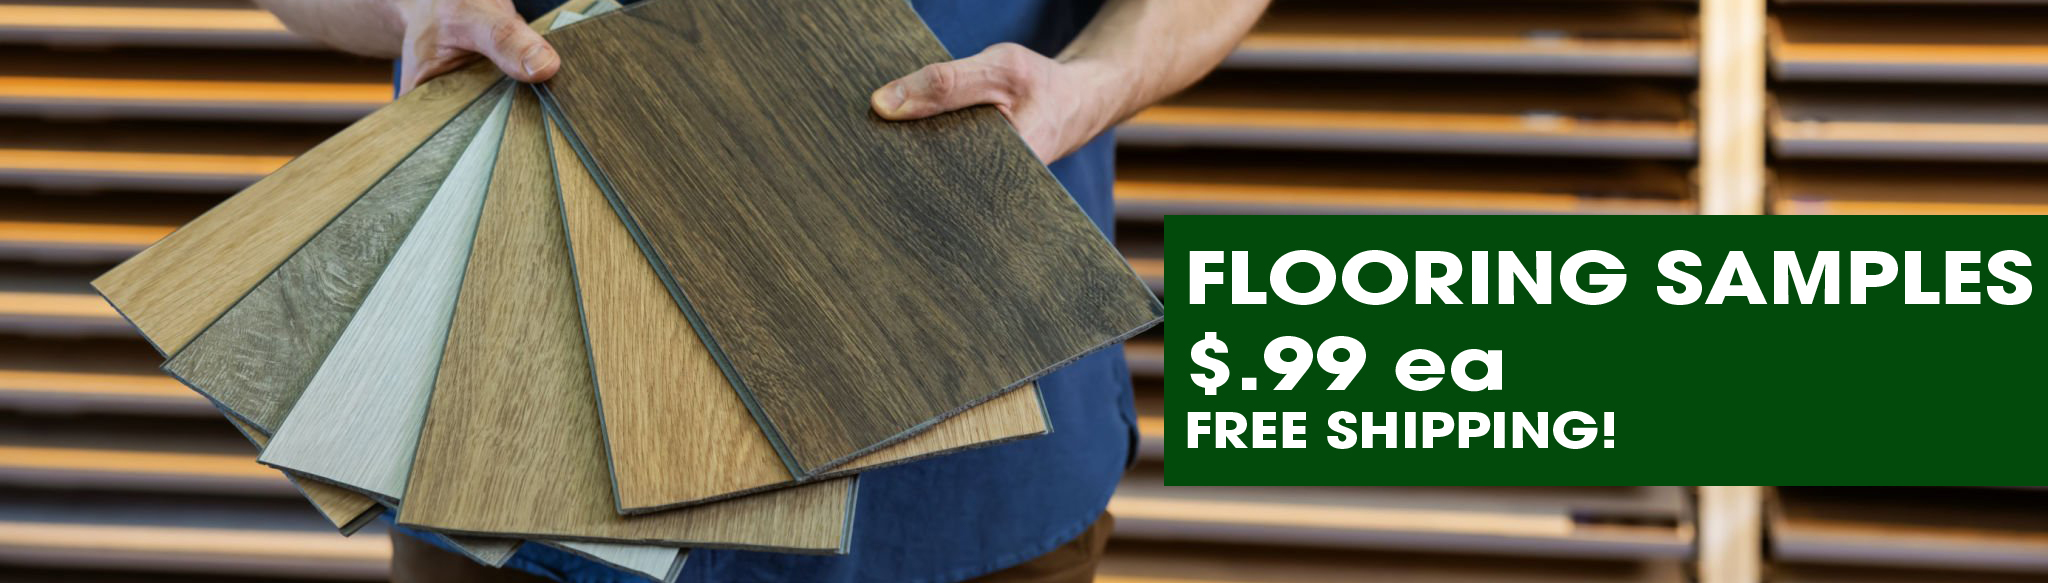 99 cent flooring samples with free shipping